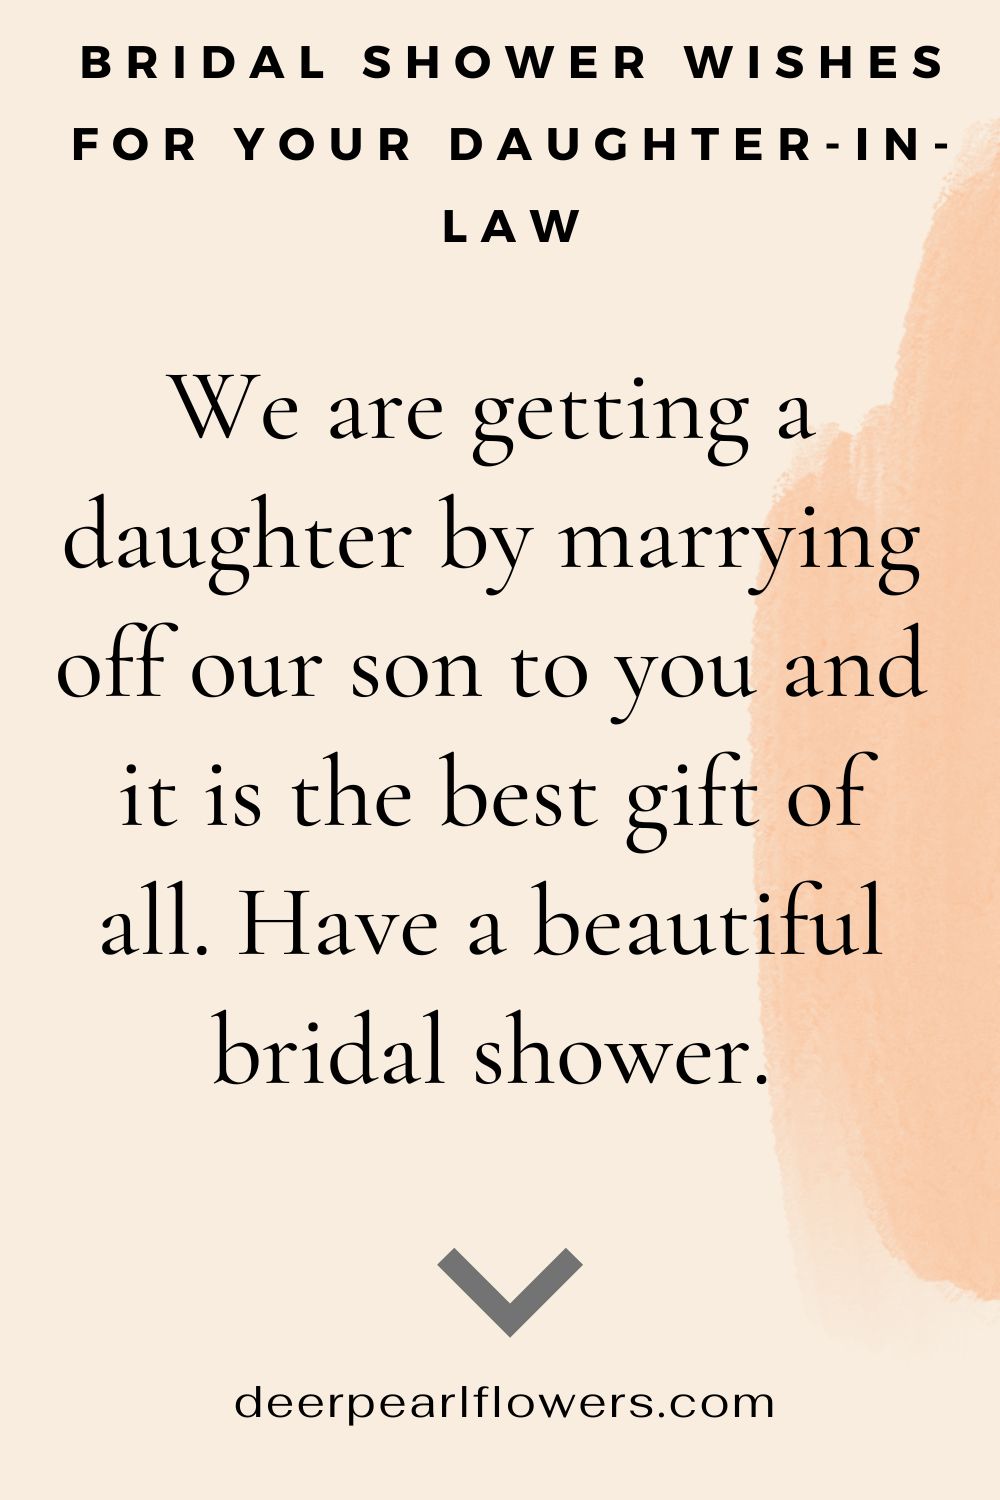 Bridal Shower Wishes for Your Daughter-in-Law6